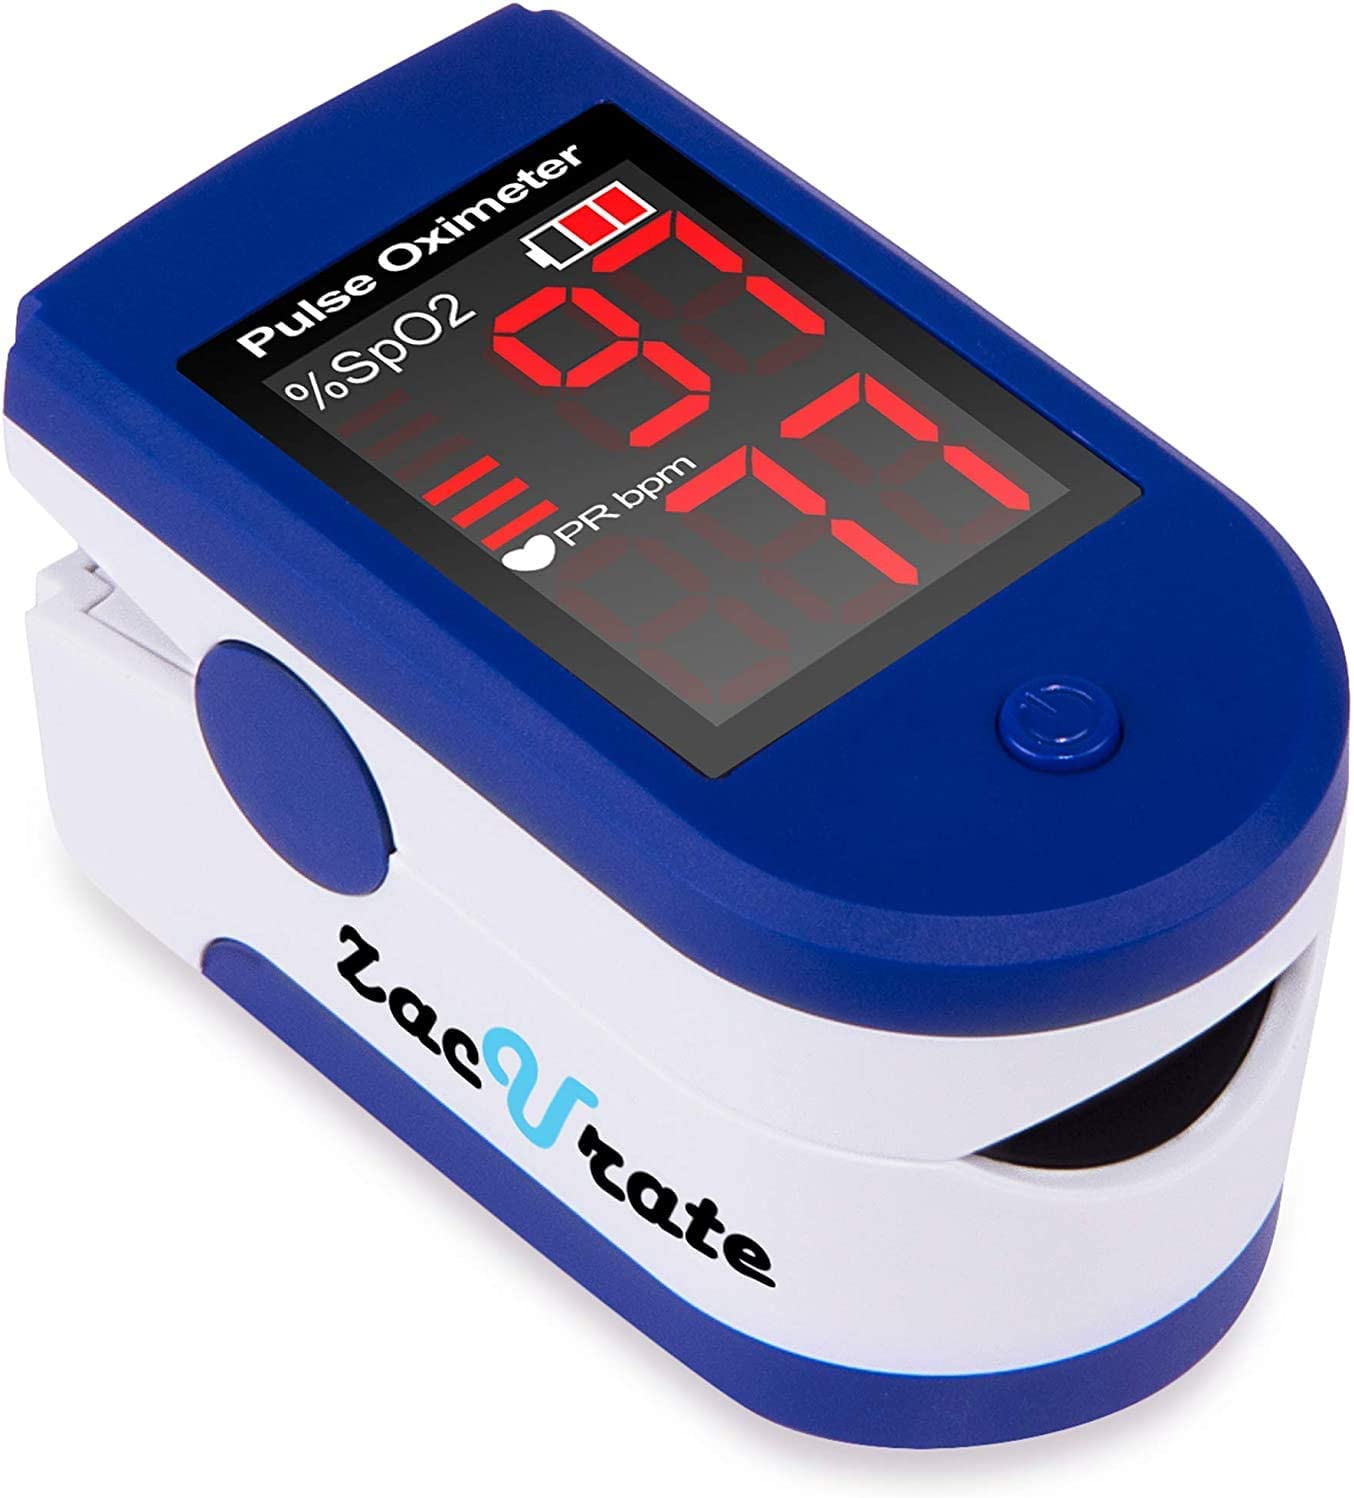 Zacurate Pro Series 500DL Sporting/Aviation Fingertip Pulse Oximeter Blood Oxygen Saturation Monitor with silicon cover, batteries and lanyard (Mystic Purple)